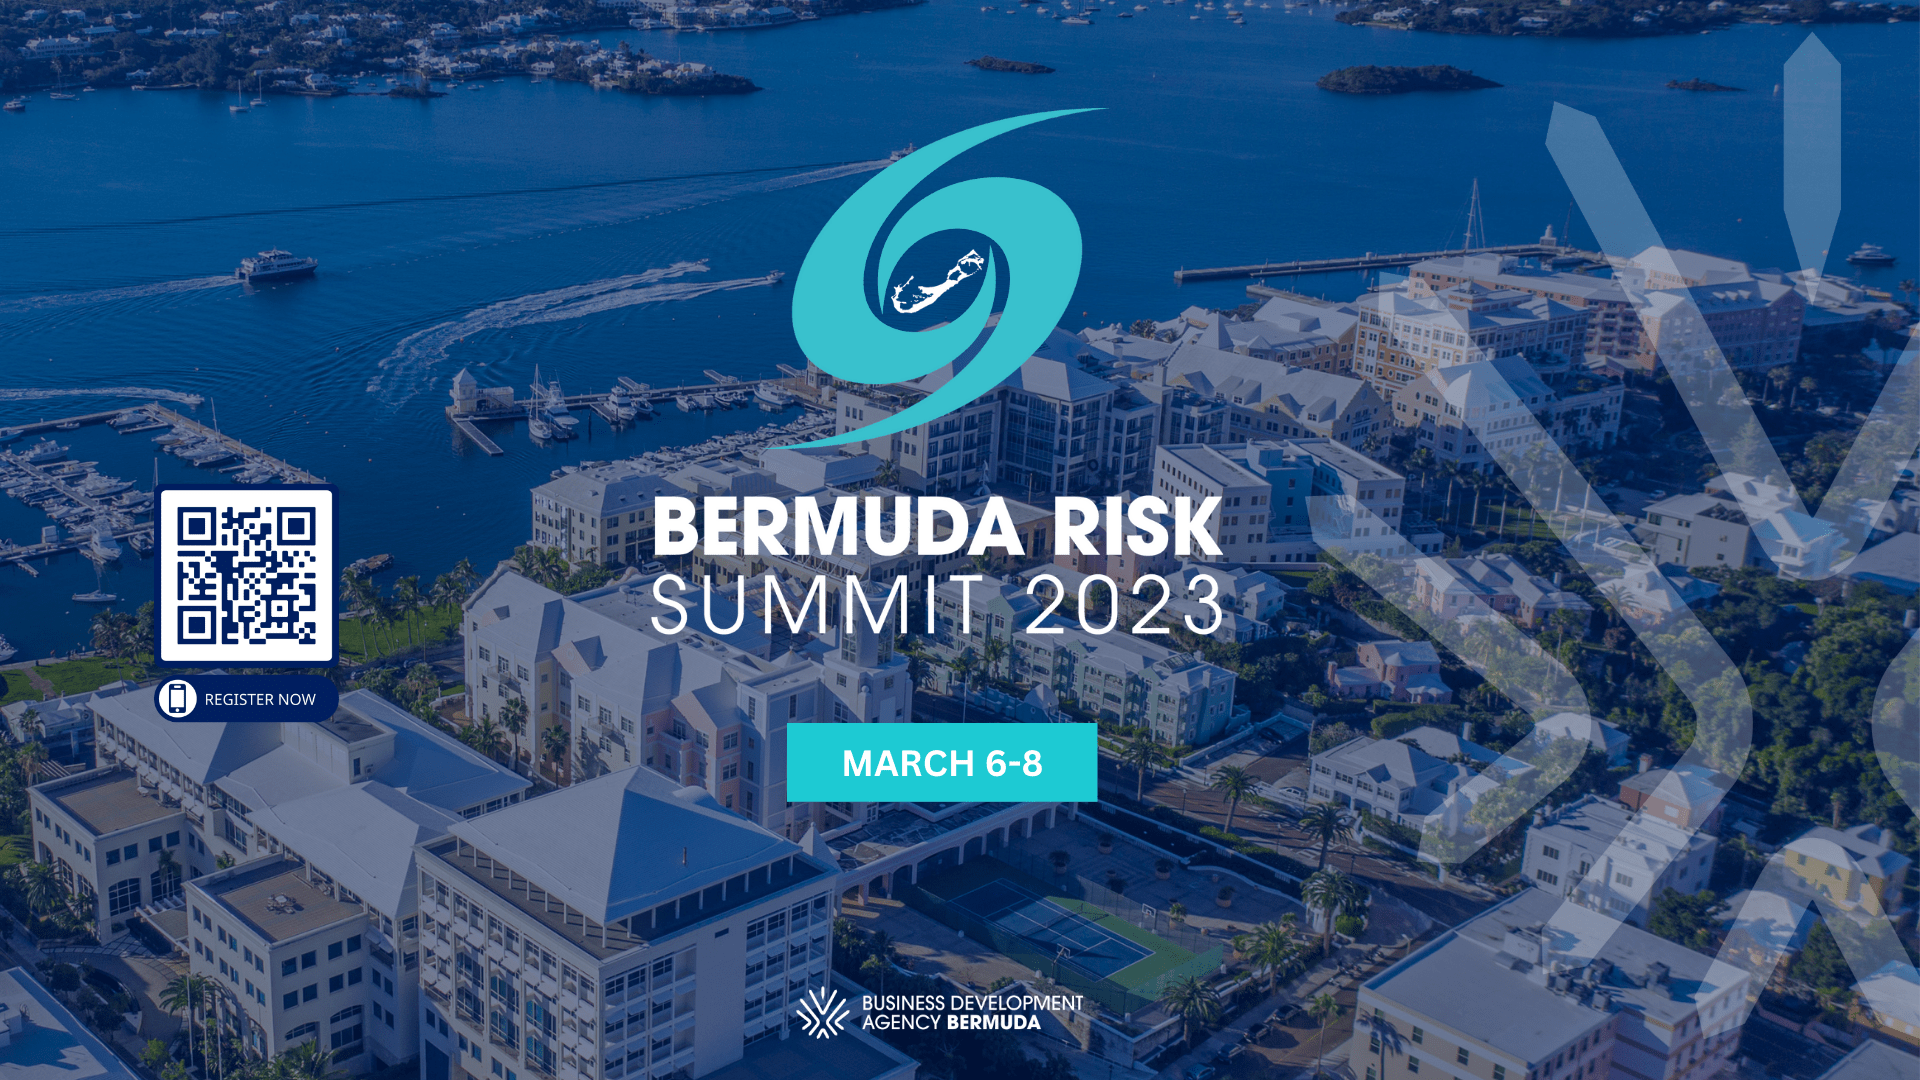 One-Third of Bermuda Risk Summit Attendees From Overseas